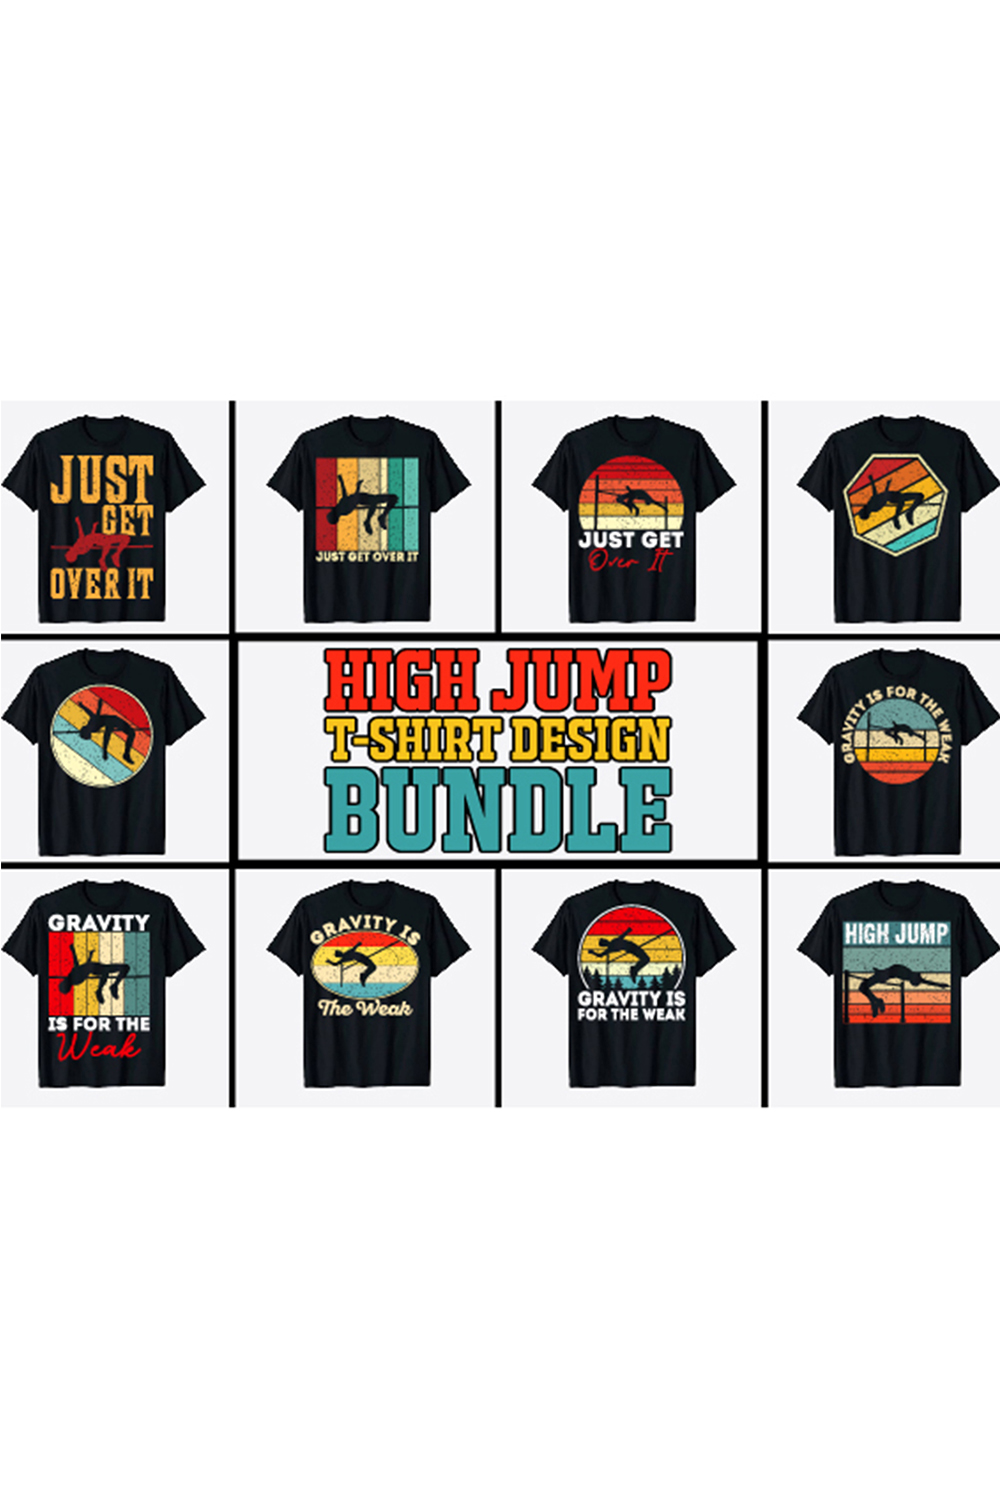 A set of images of t-shirts with a unique print on the theme of high jump.